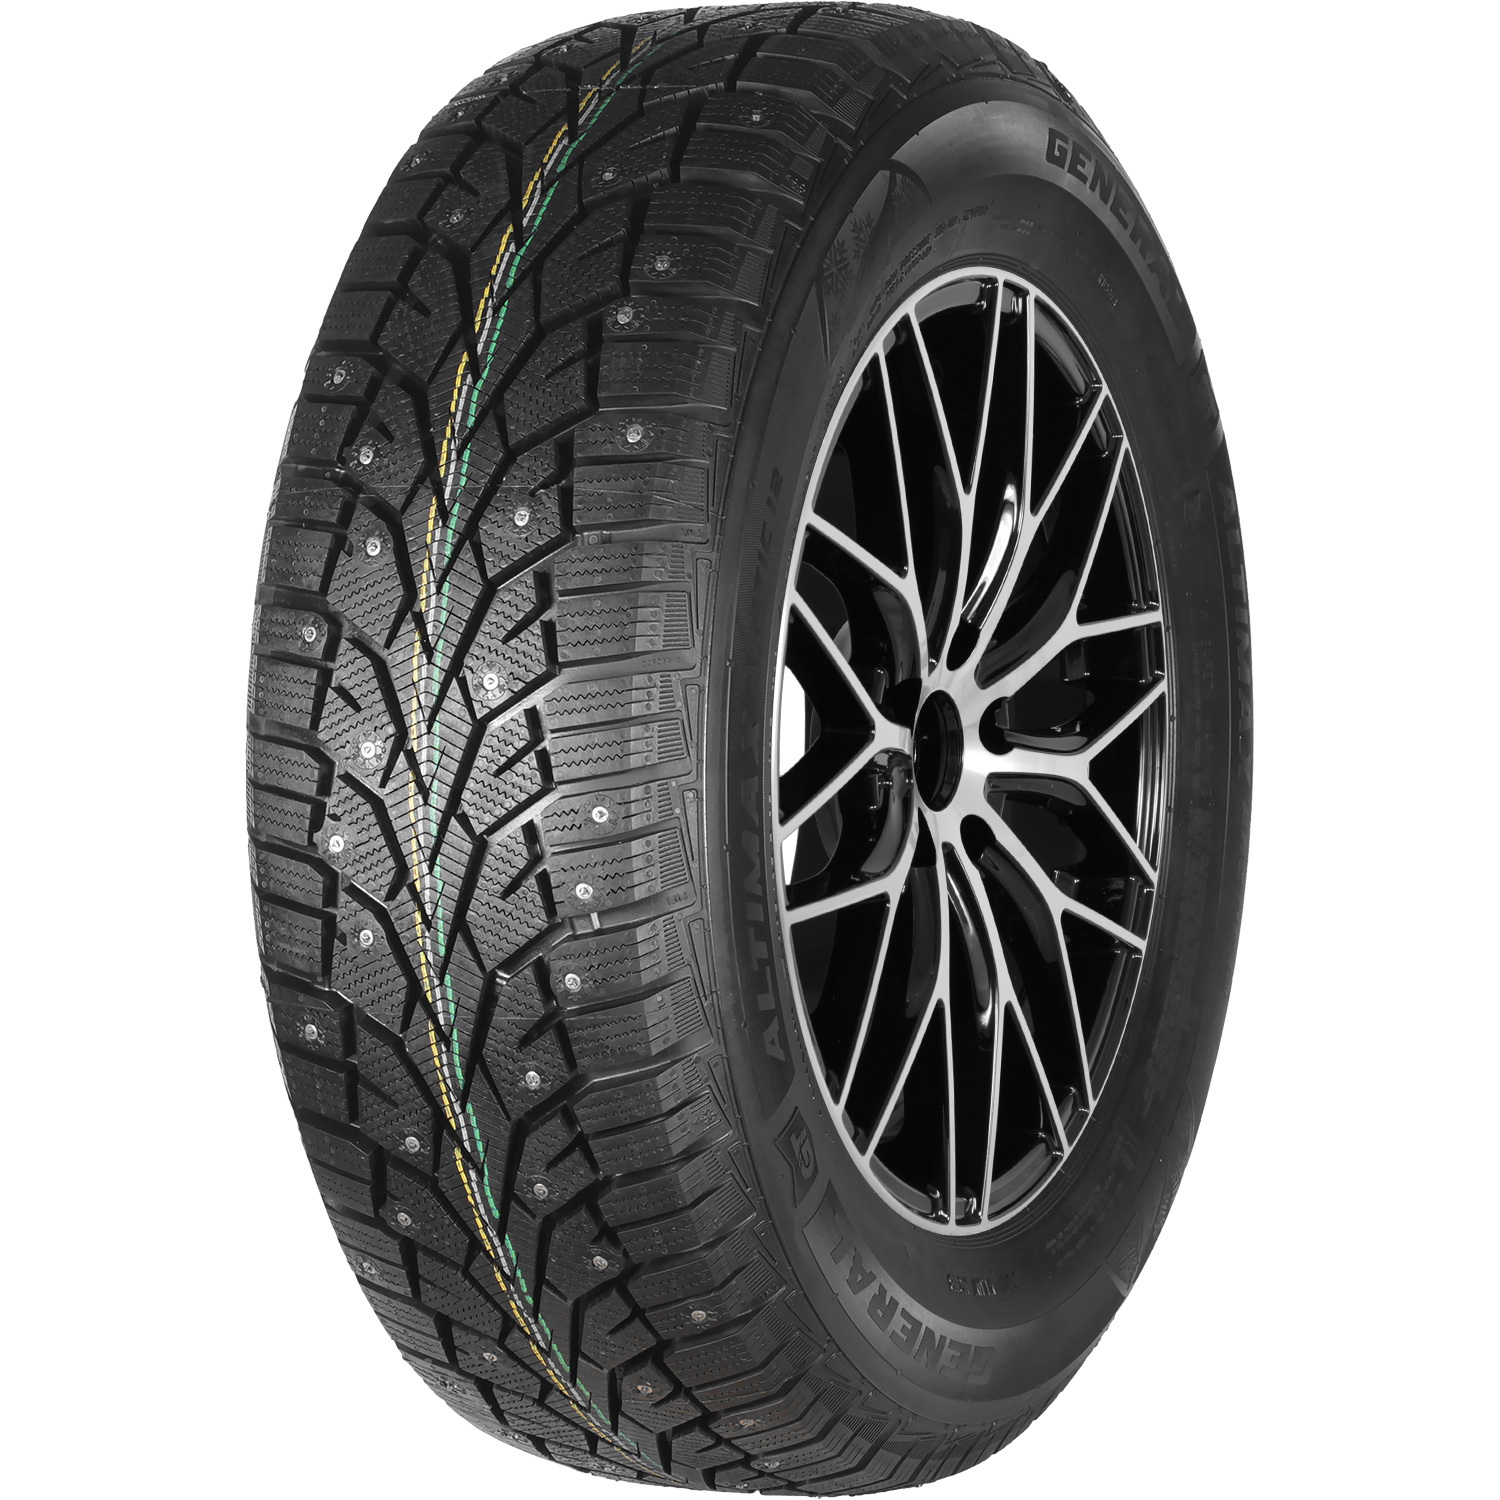 Автомобильная шина General Tire Altimax Arctic 12 185/65 R14 90T Шипованные tire cover central ocean sunrise sun moon spare tire cover select tire size back up camera in menu custom sized to any